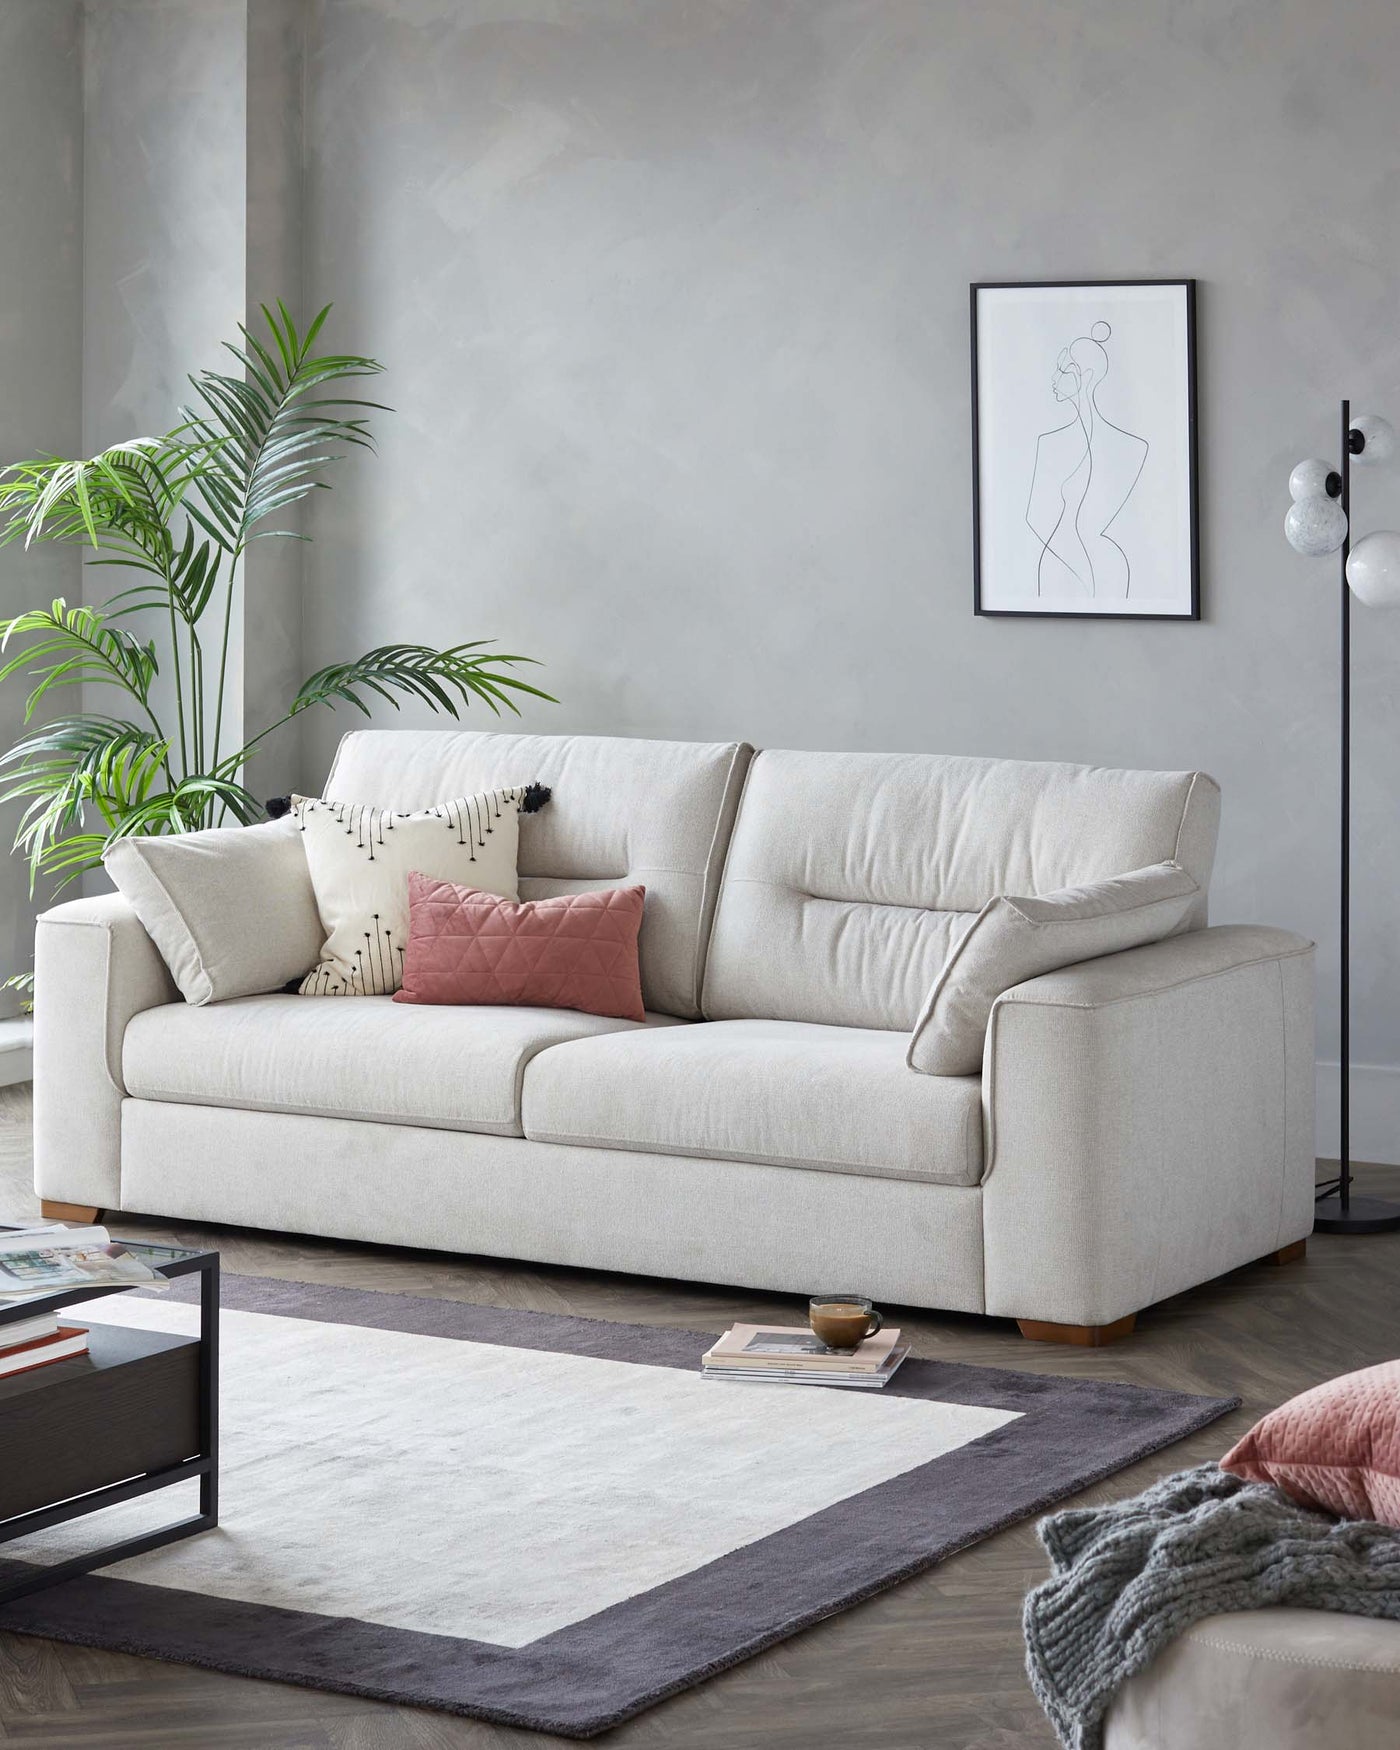 A contemporary light beige fabric three-seater sofa with cushions in various shades of pink and beige. In front of the sofa is a modern black frame coffee table with a glass top, over a two-tone grey and white area rug. The setting is complemented by a tall floor lamp and a framed line art piece on the wall.